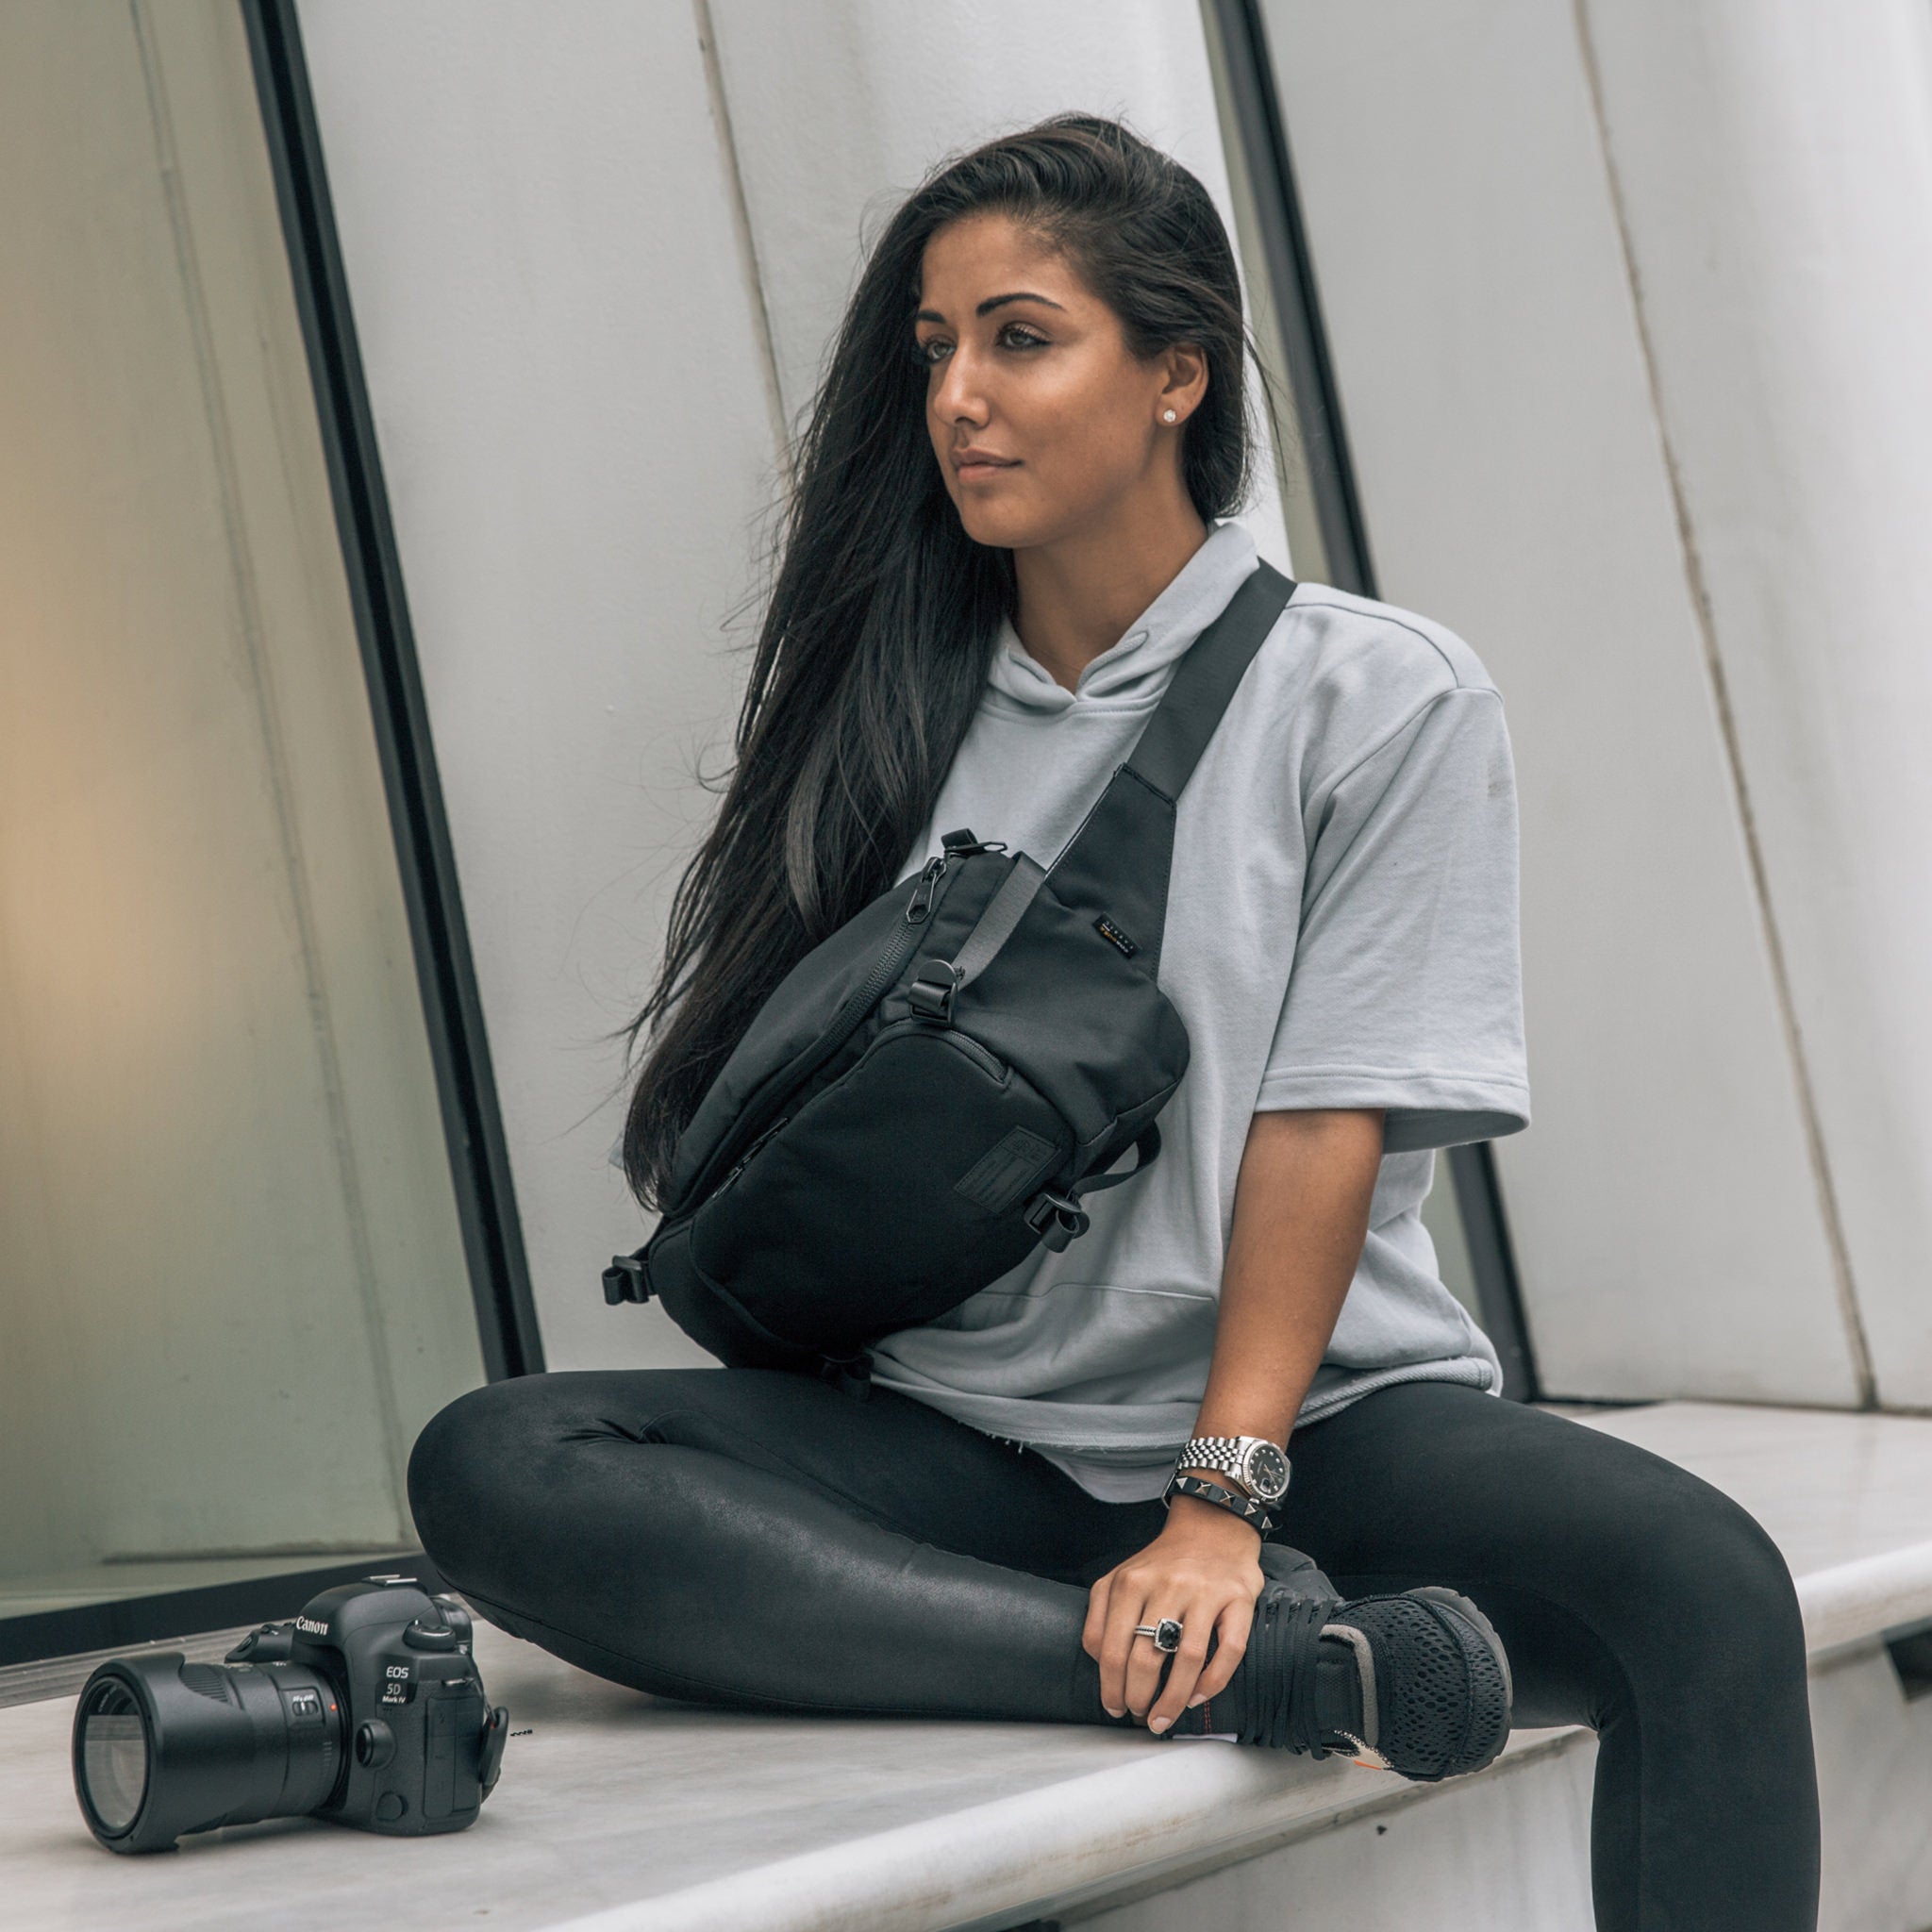 The best camera sling bags of 2023